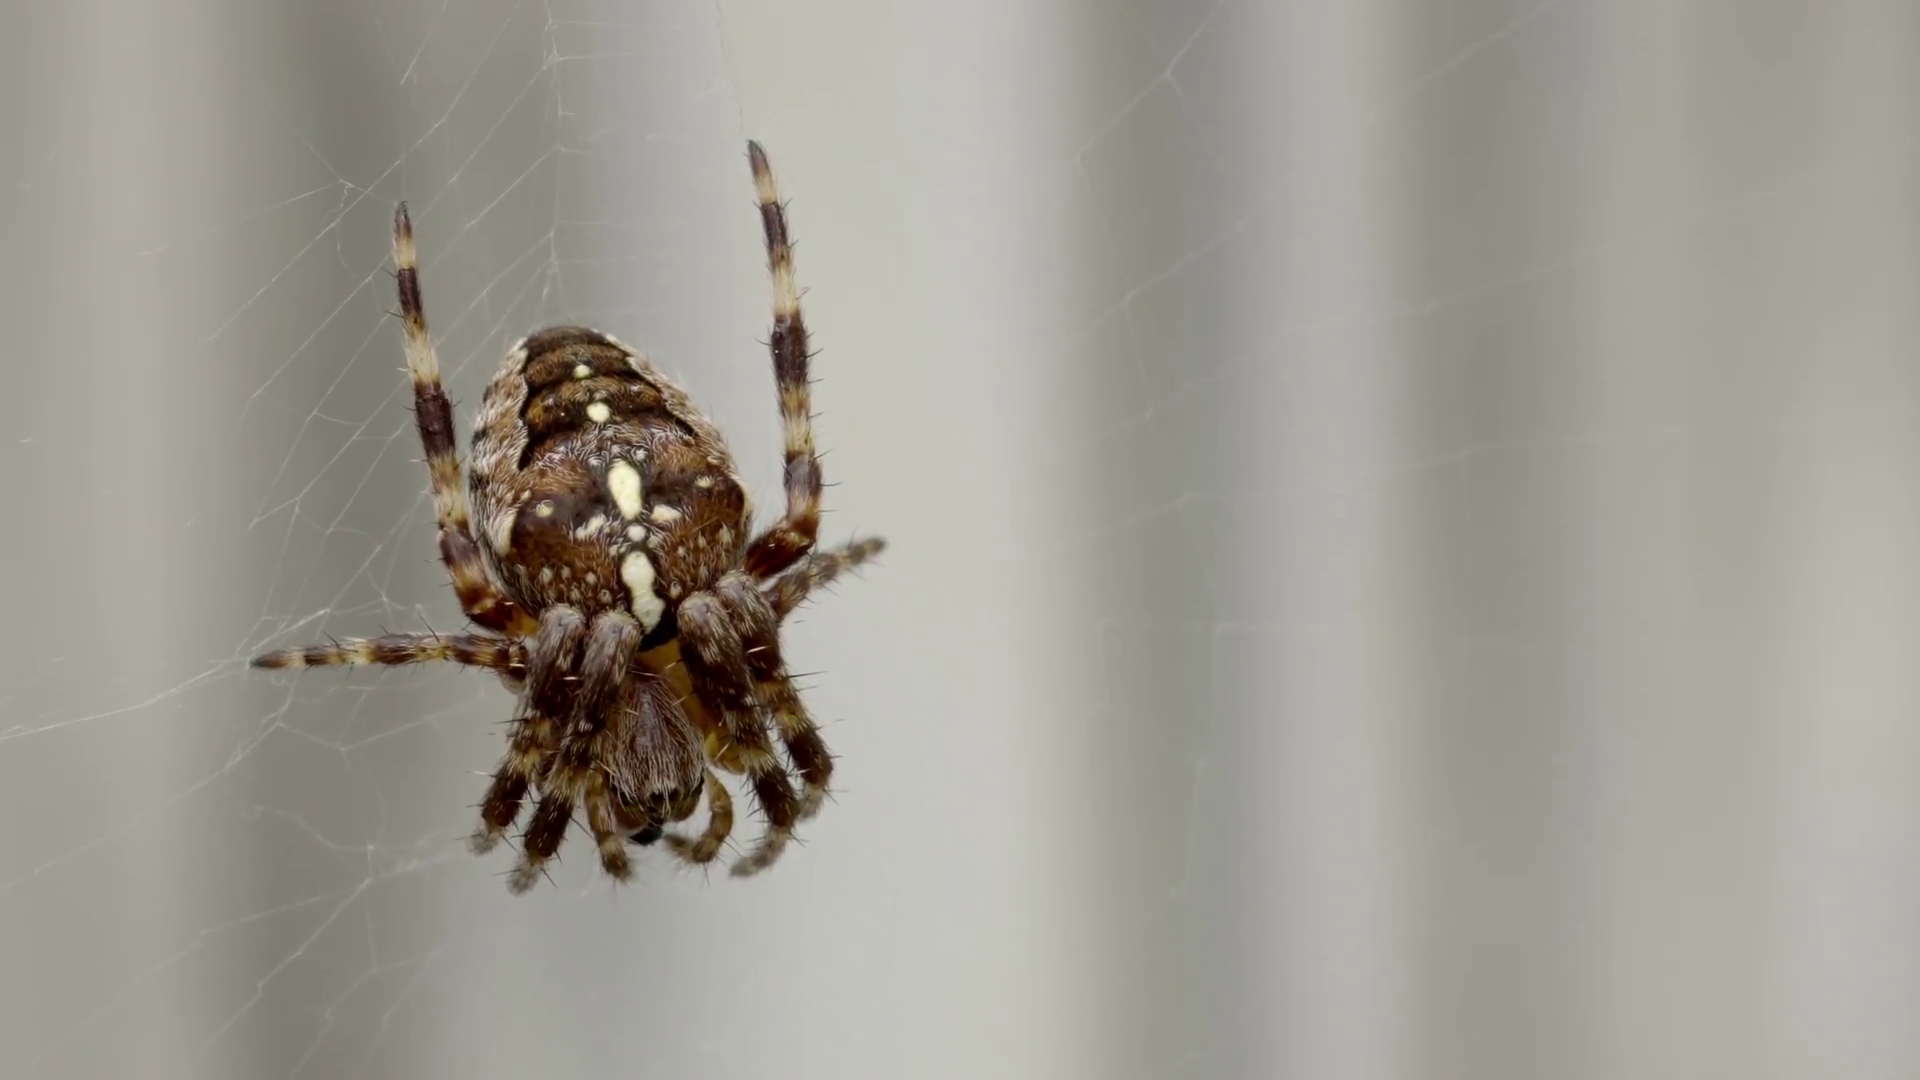 Spider on a web extreme close up stock footage. A brown hairy spider ...